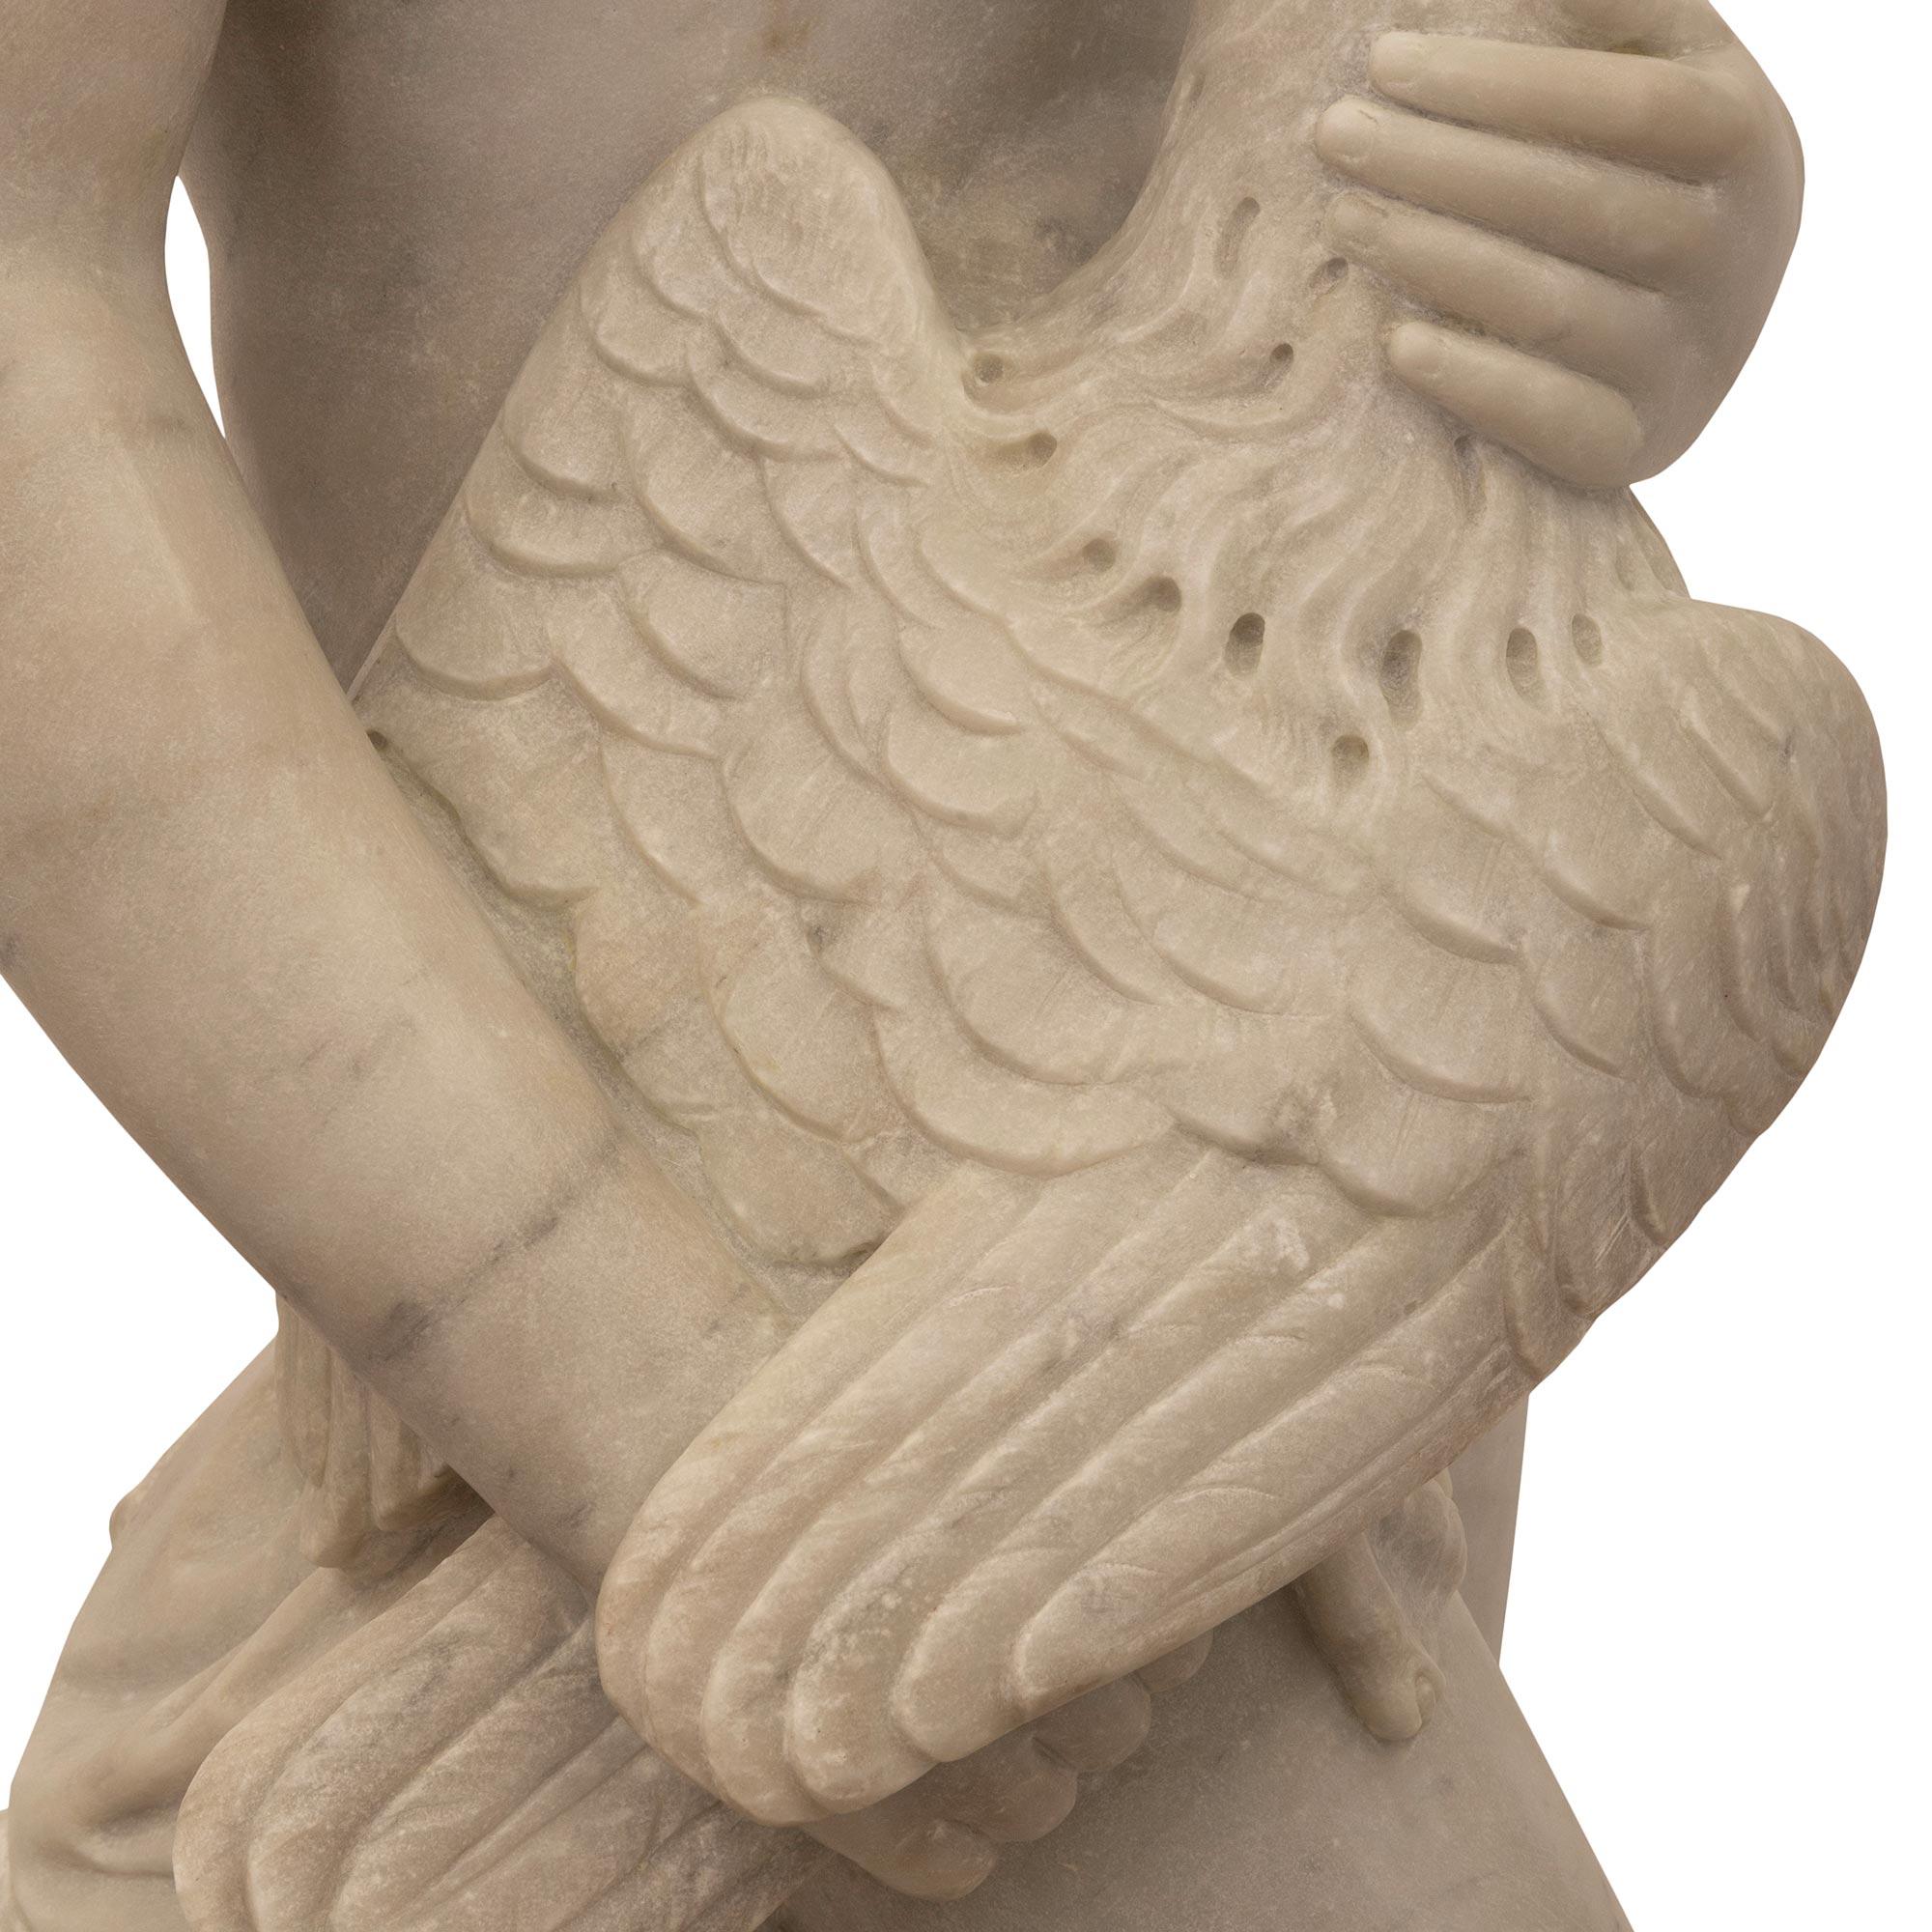 Italian 19th Century White Carrara Marble Statue of Leda and the Swan For Sale 5